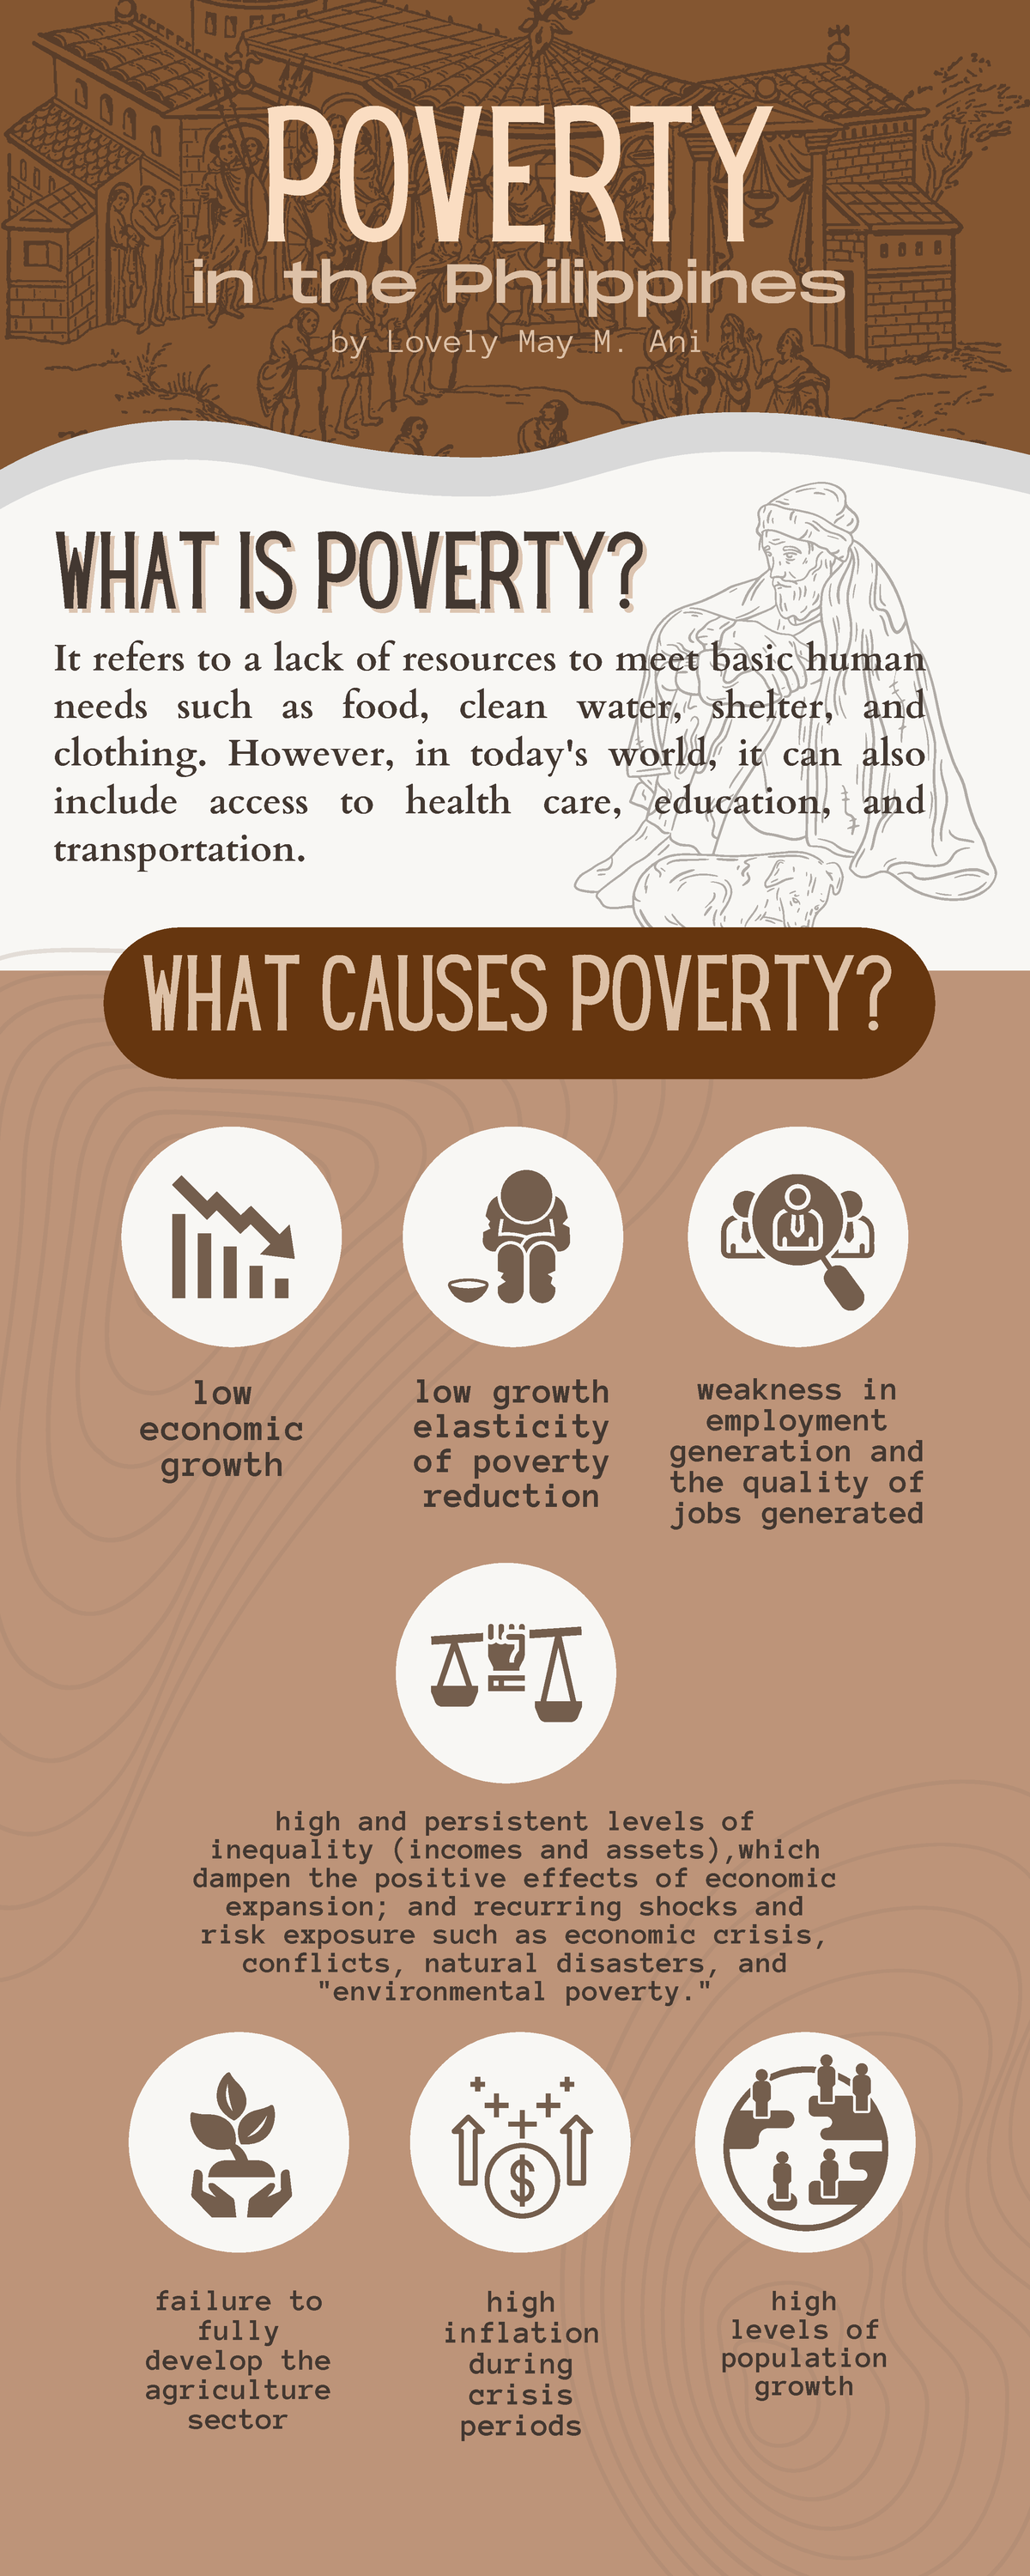 what are the research questions about poverty